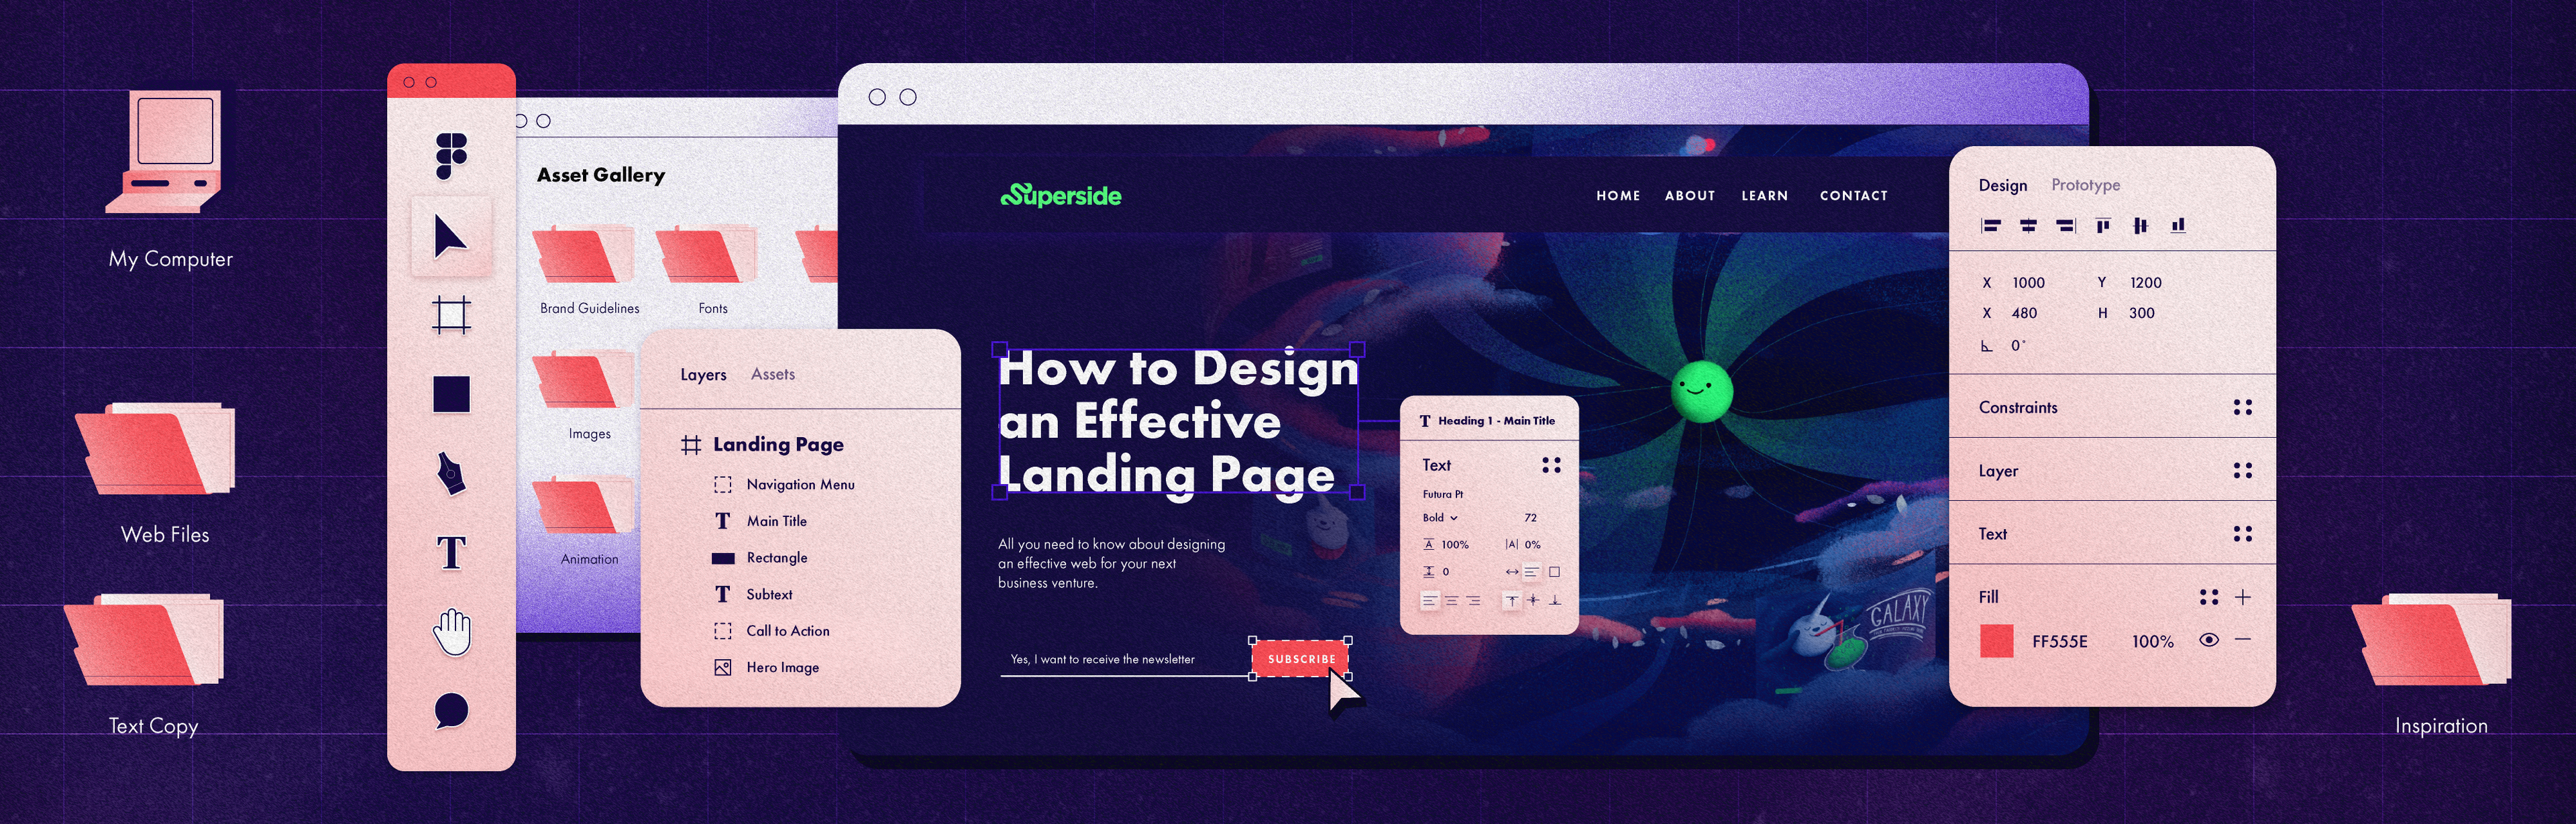 How to Design an Effective Landing Page in 2022 and Beyond